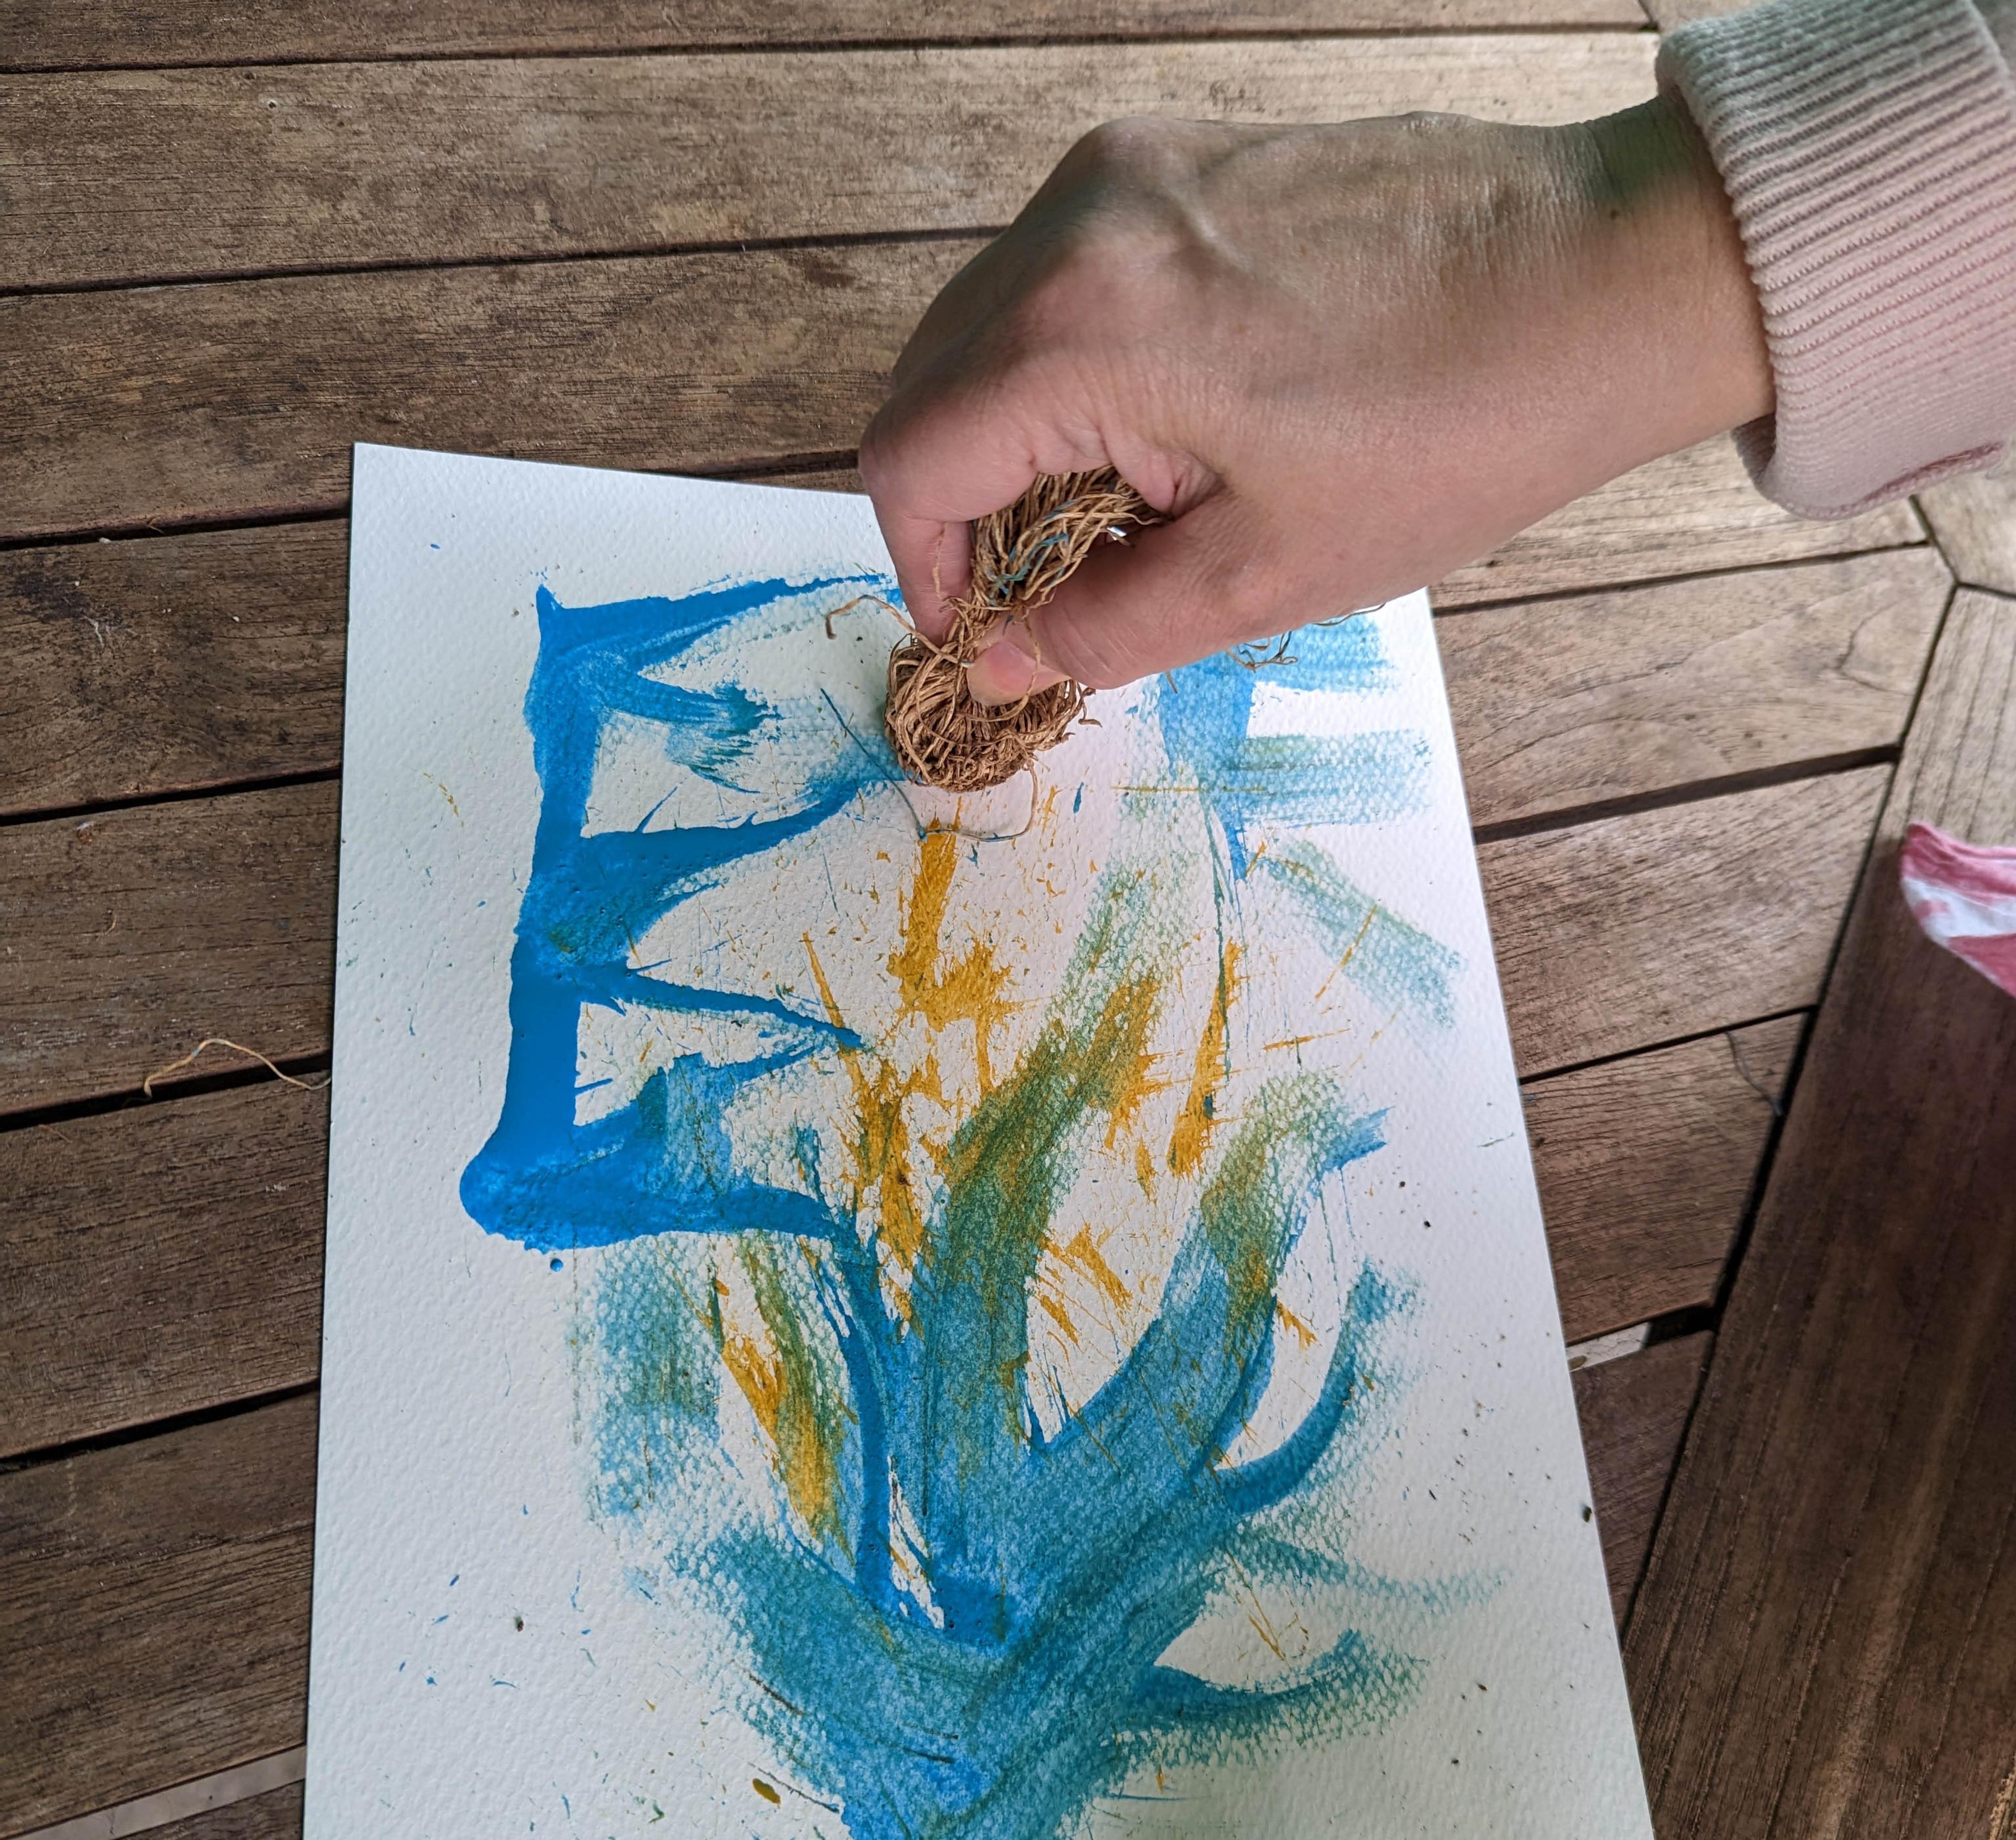 A hand applying paint to paper with some natural twine.